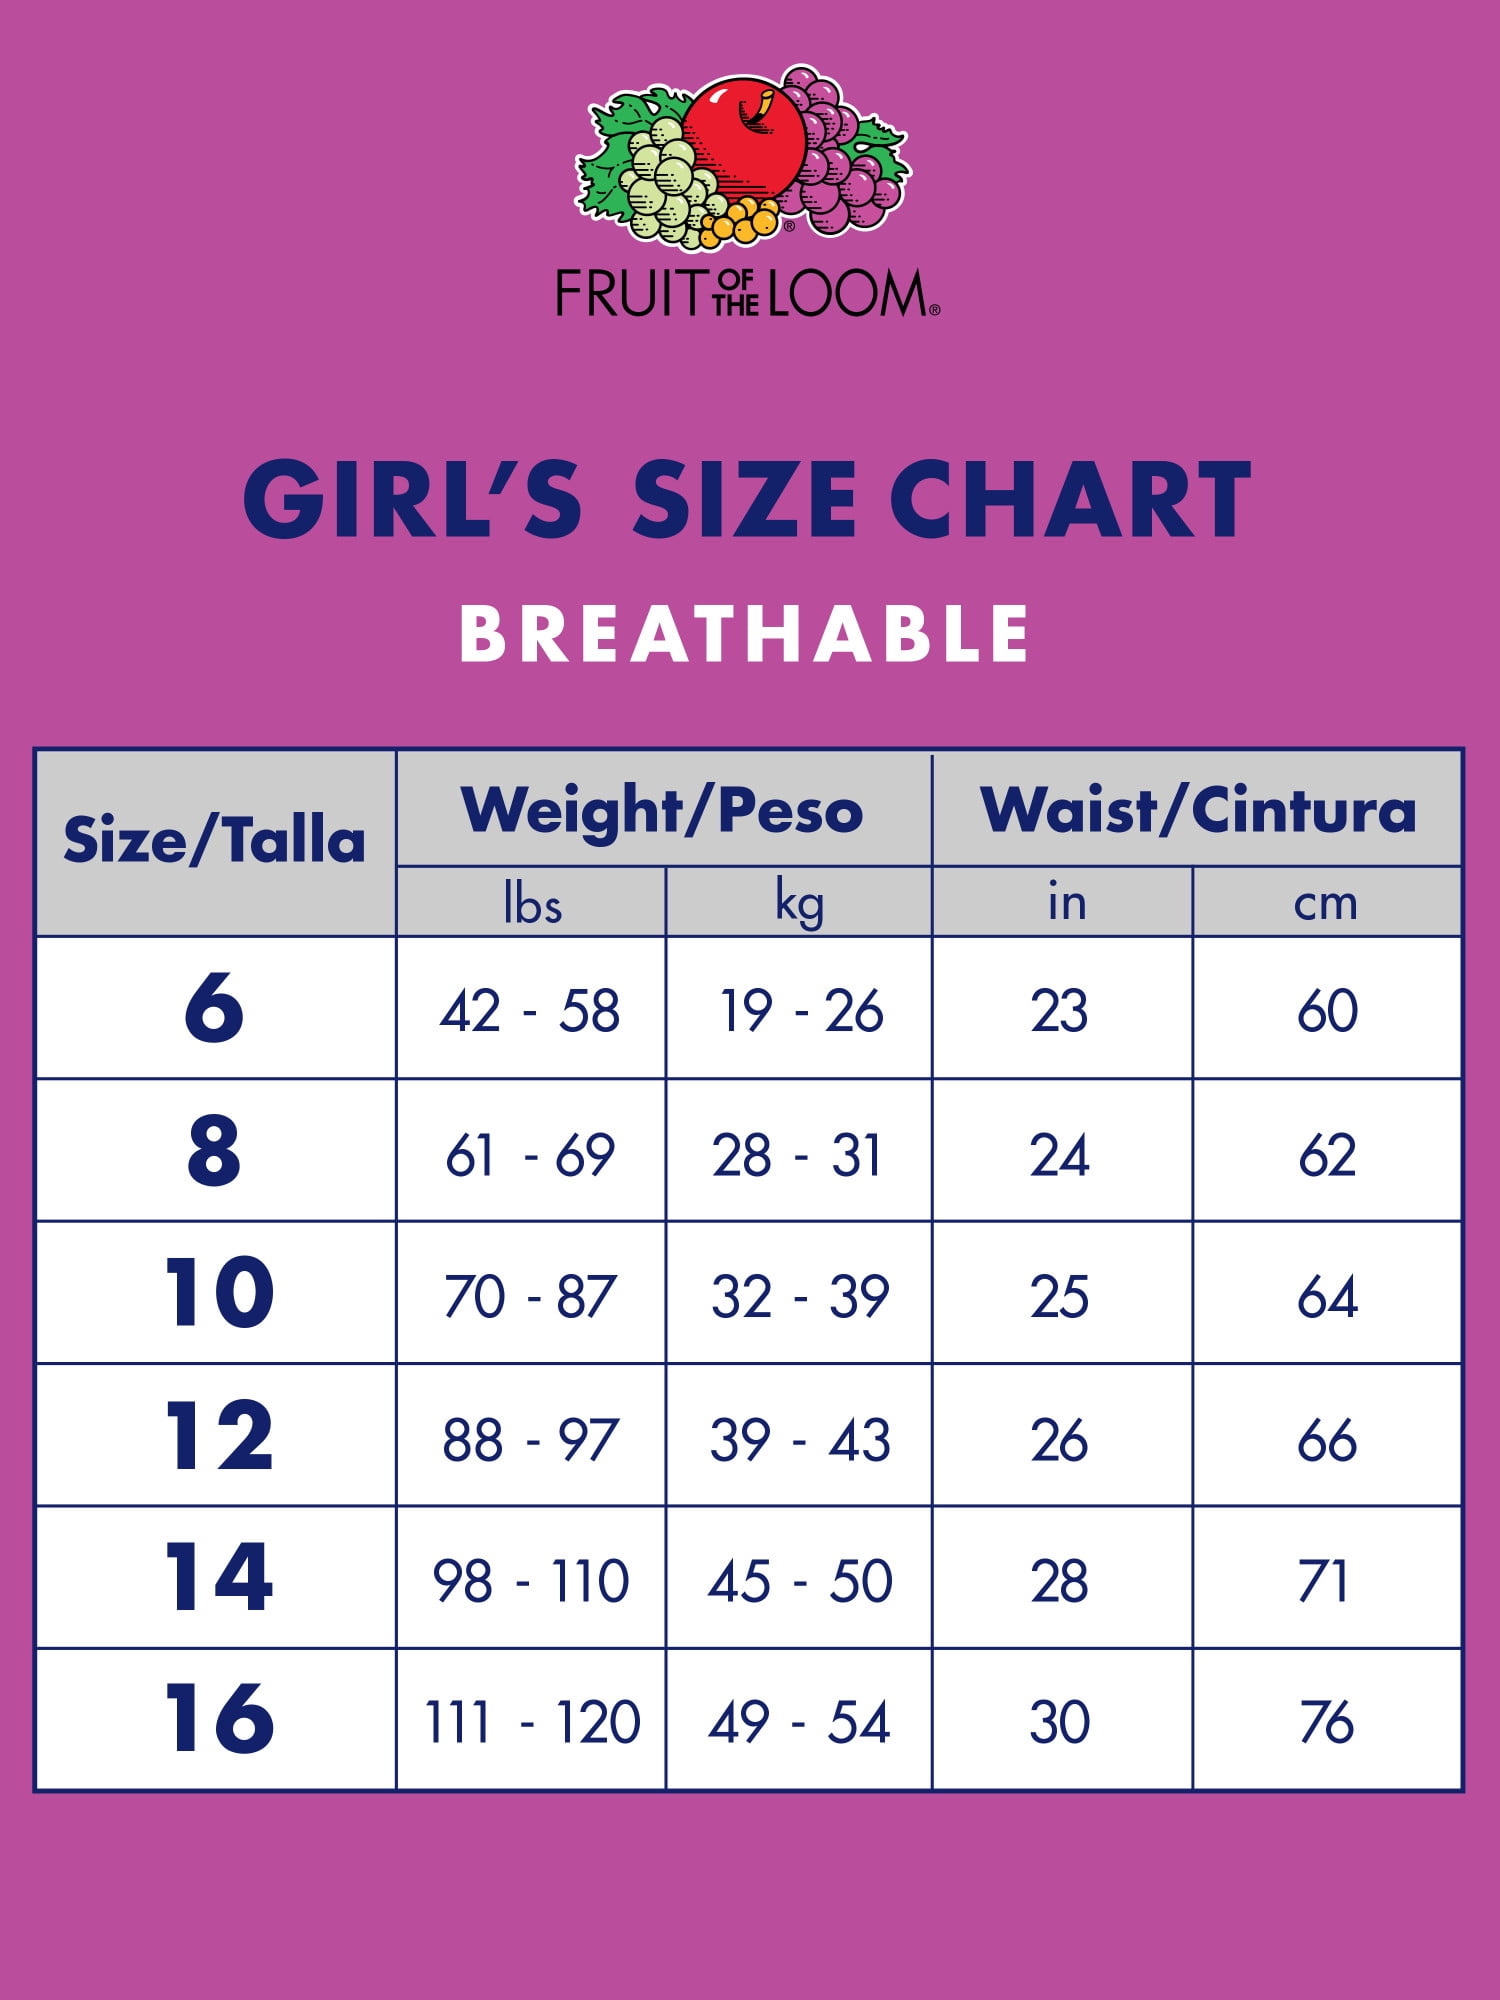 Fruit of the Loom Girls' Breathable Underwear, Assorted Cotton